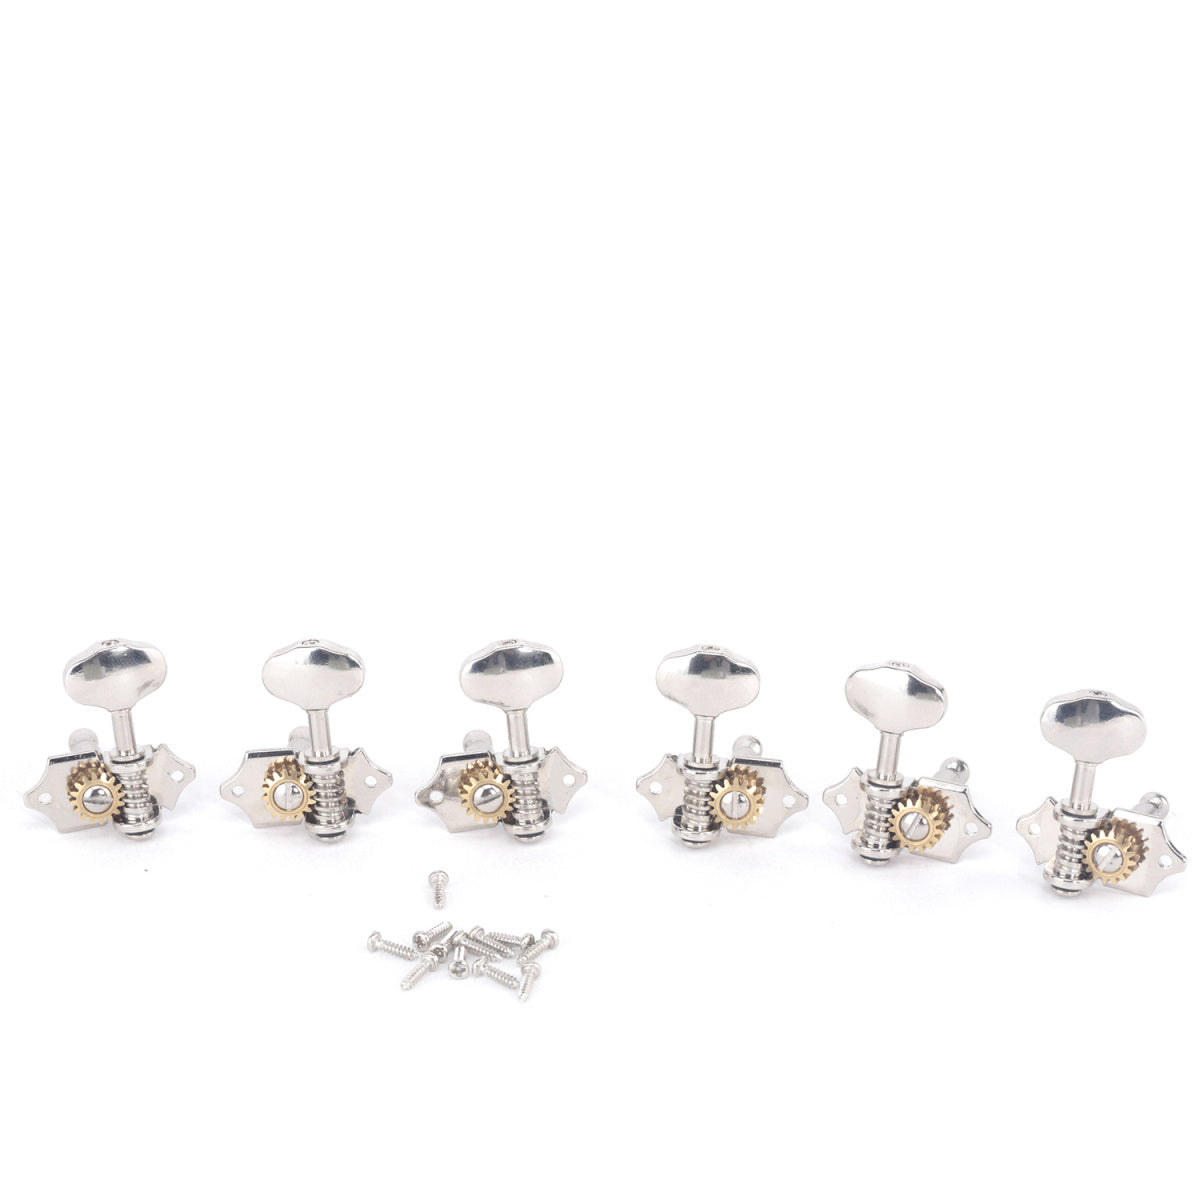 Musiclily Pro 3+3 Vintage Acoustic Guitar Machine Heads Tuning Pegs Keys Tuners Set, Nickel with Metal Button